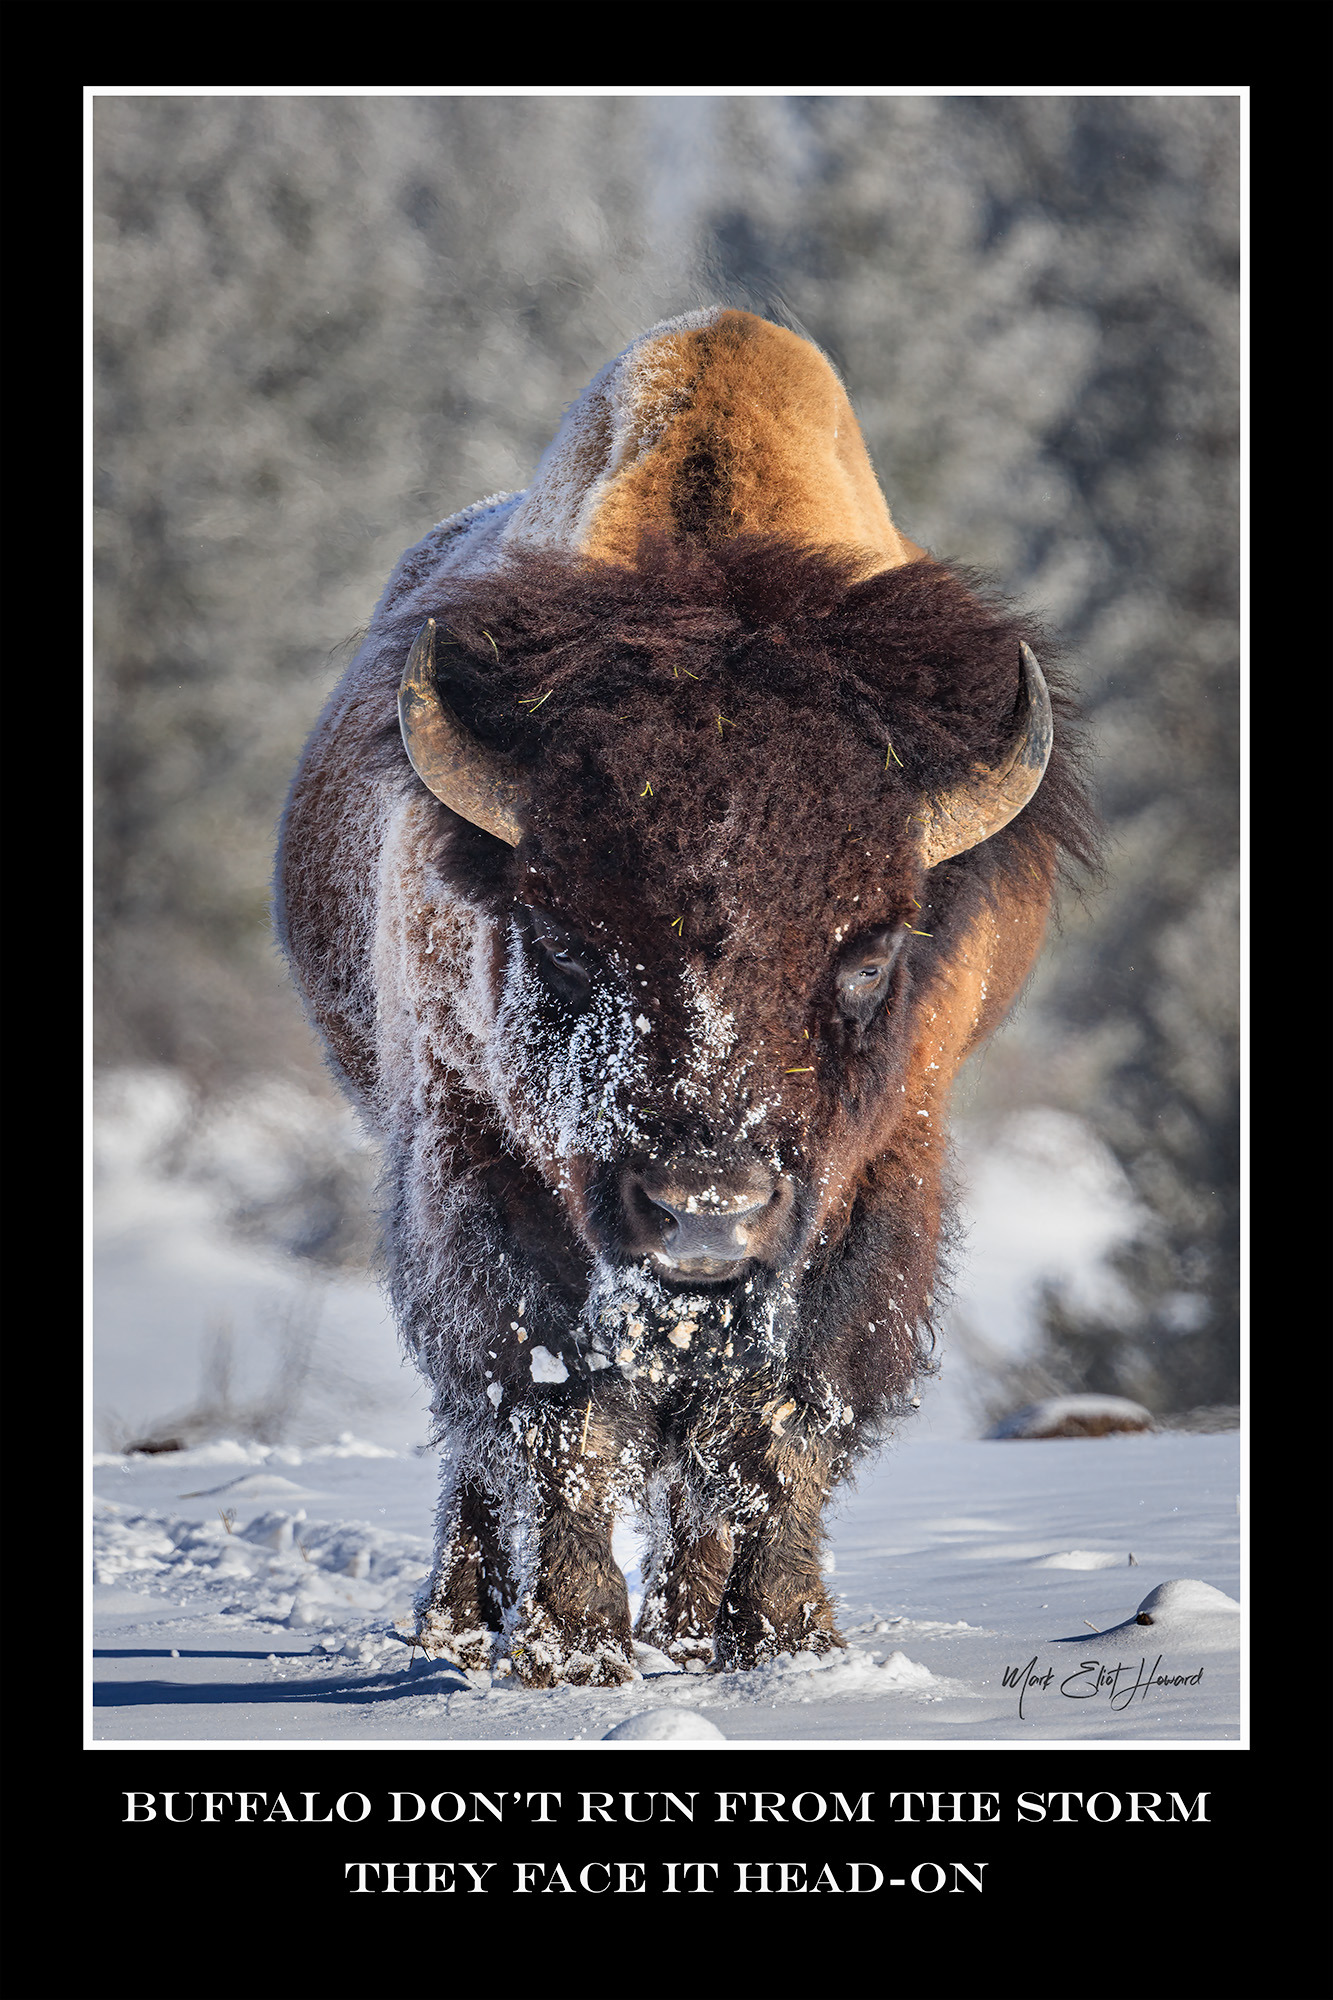 Bison in snow limited edition web tspnyj